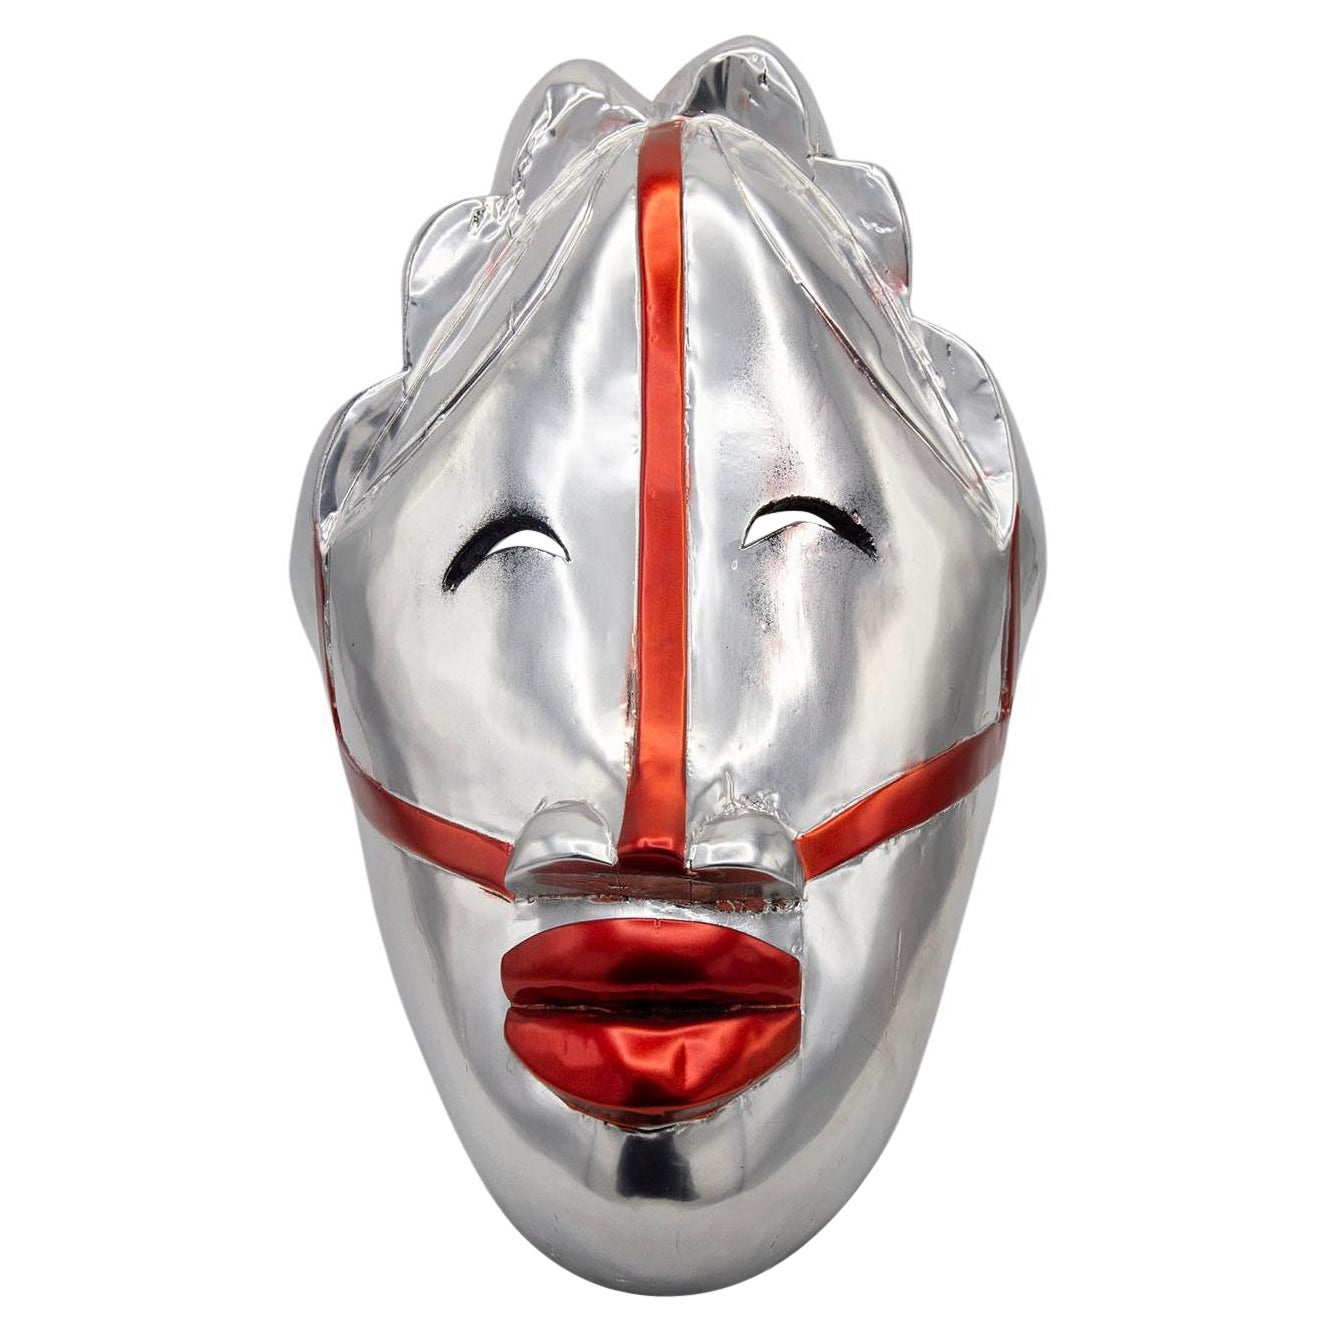 African Futurist Silver Mask Created by Bomber Bax